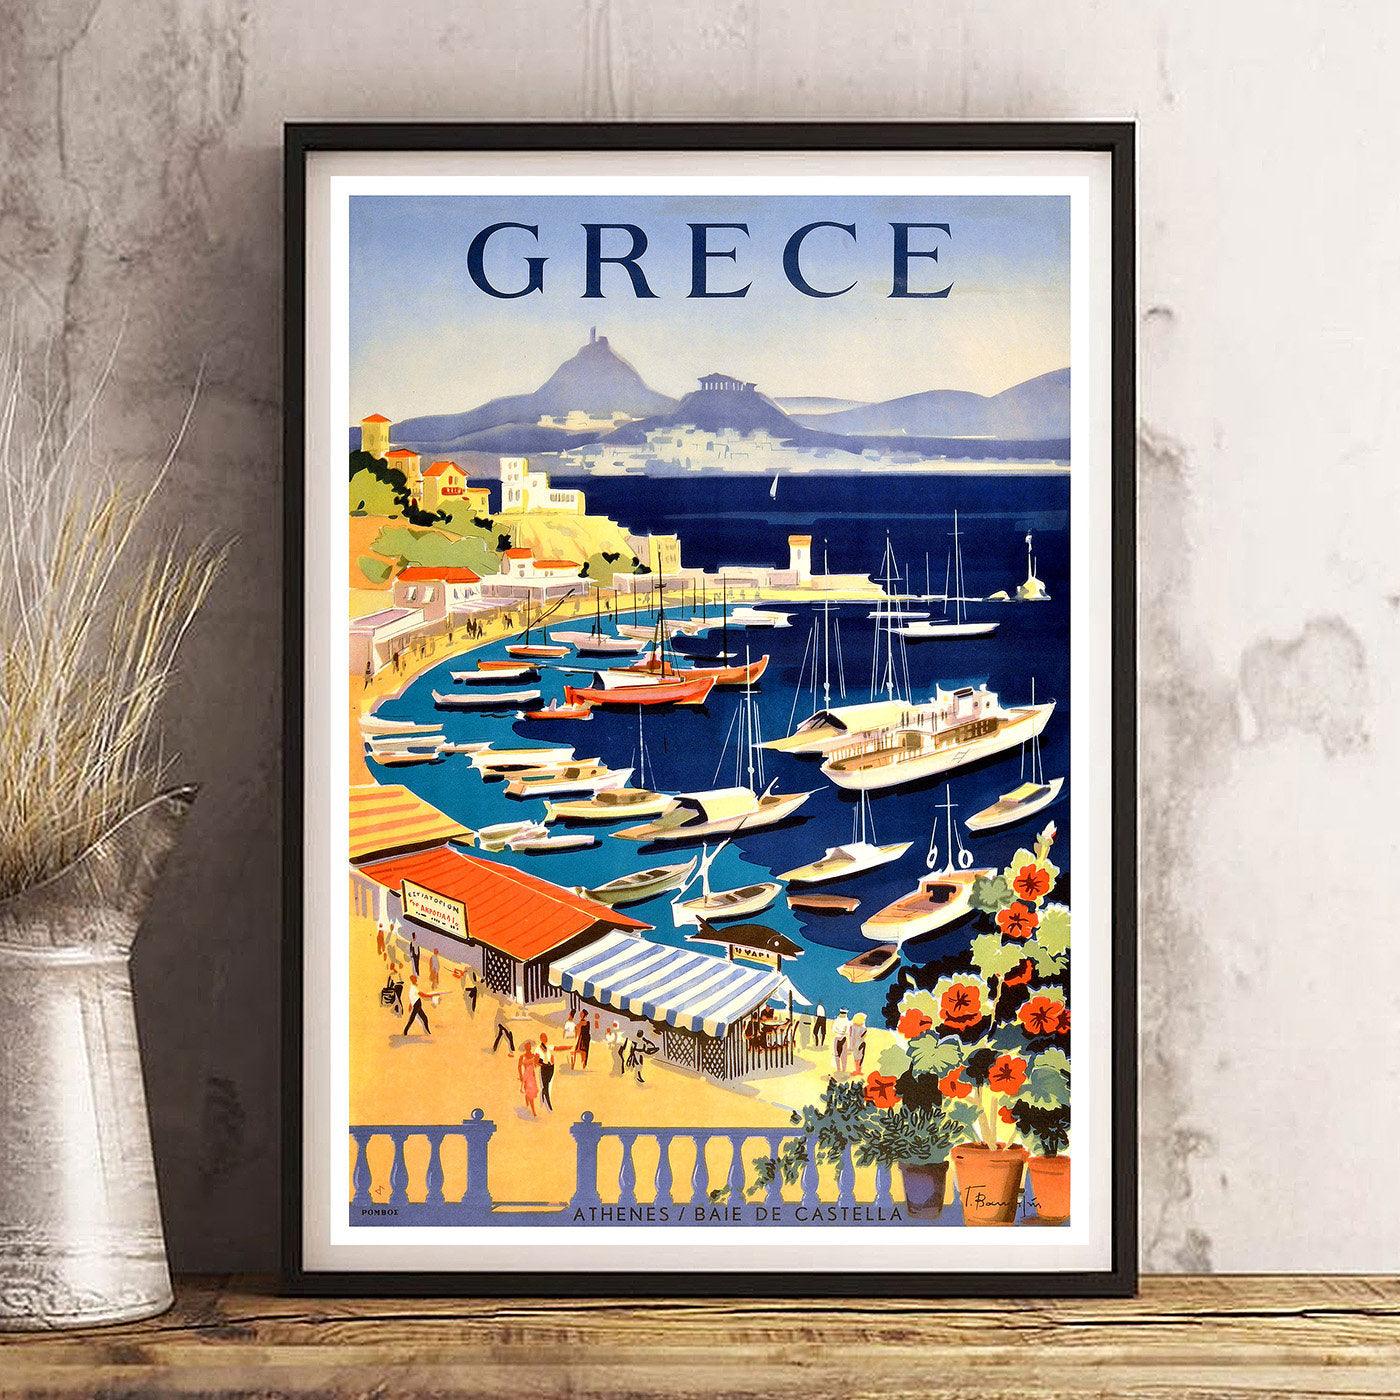 GREECE Athens - Vintage Travel Poster - Classic Posters